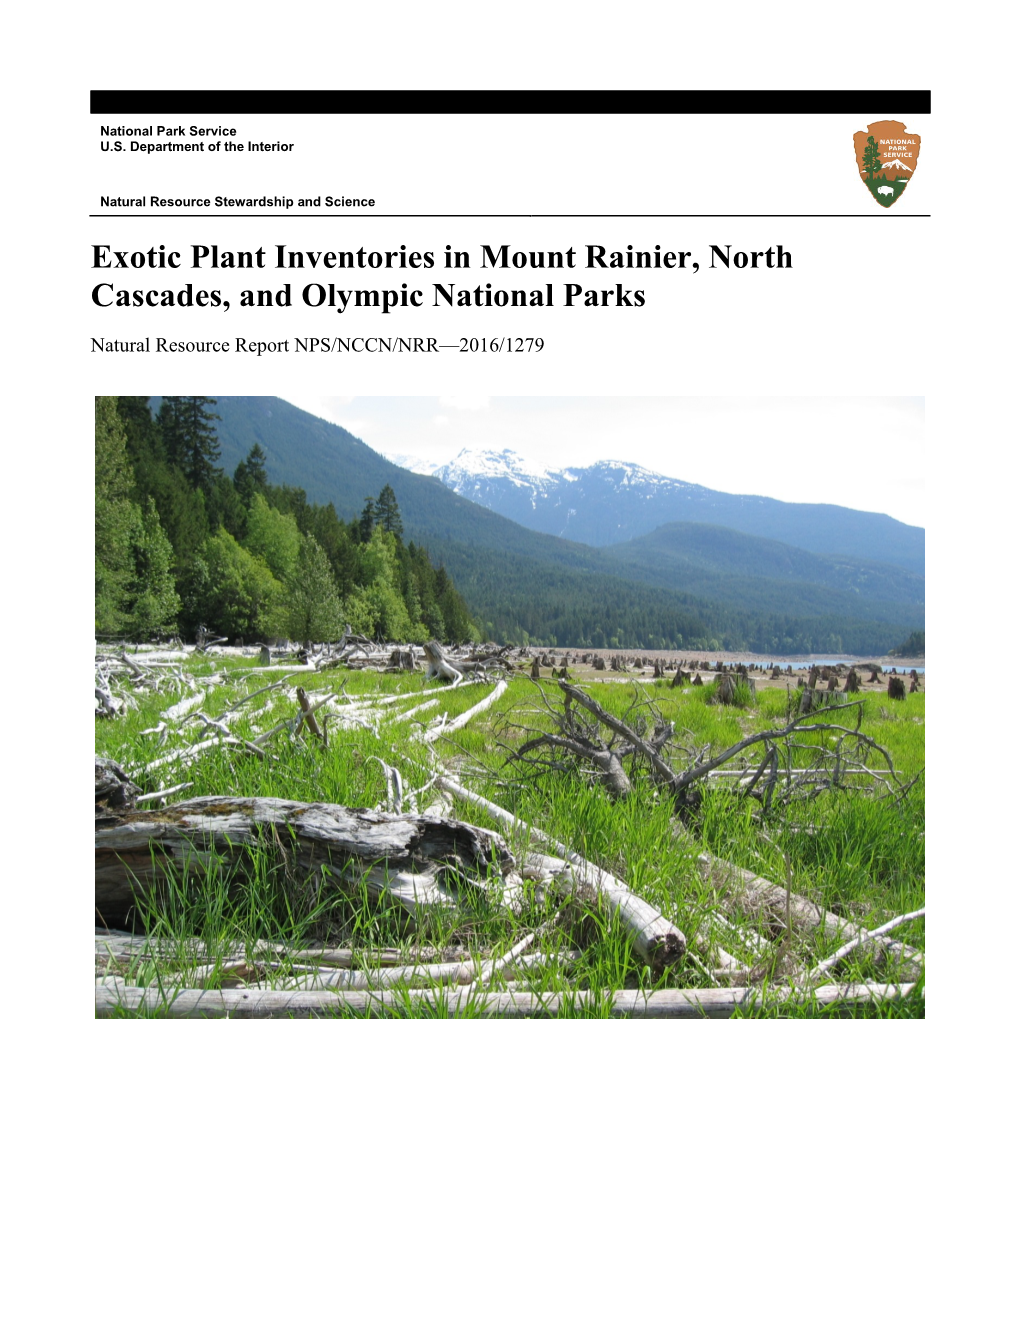 Exotic Plant Inventories in Mount Rainier, North Cascades, and Olympic National Parks